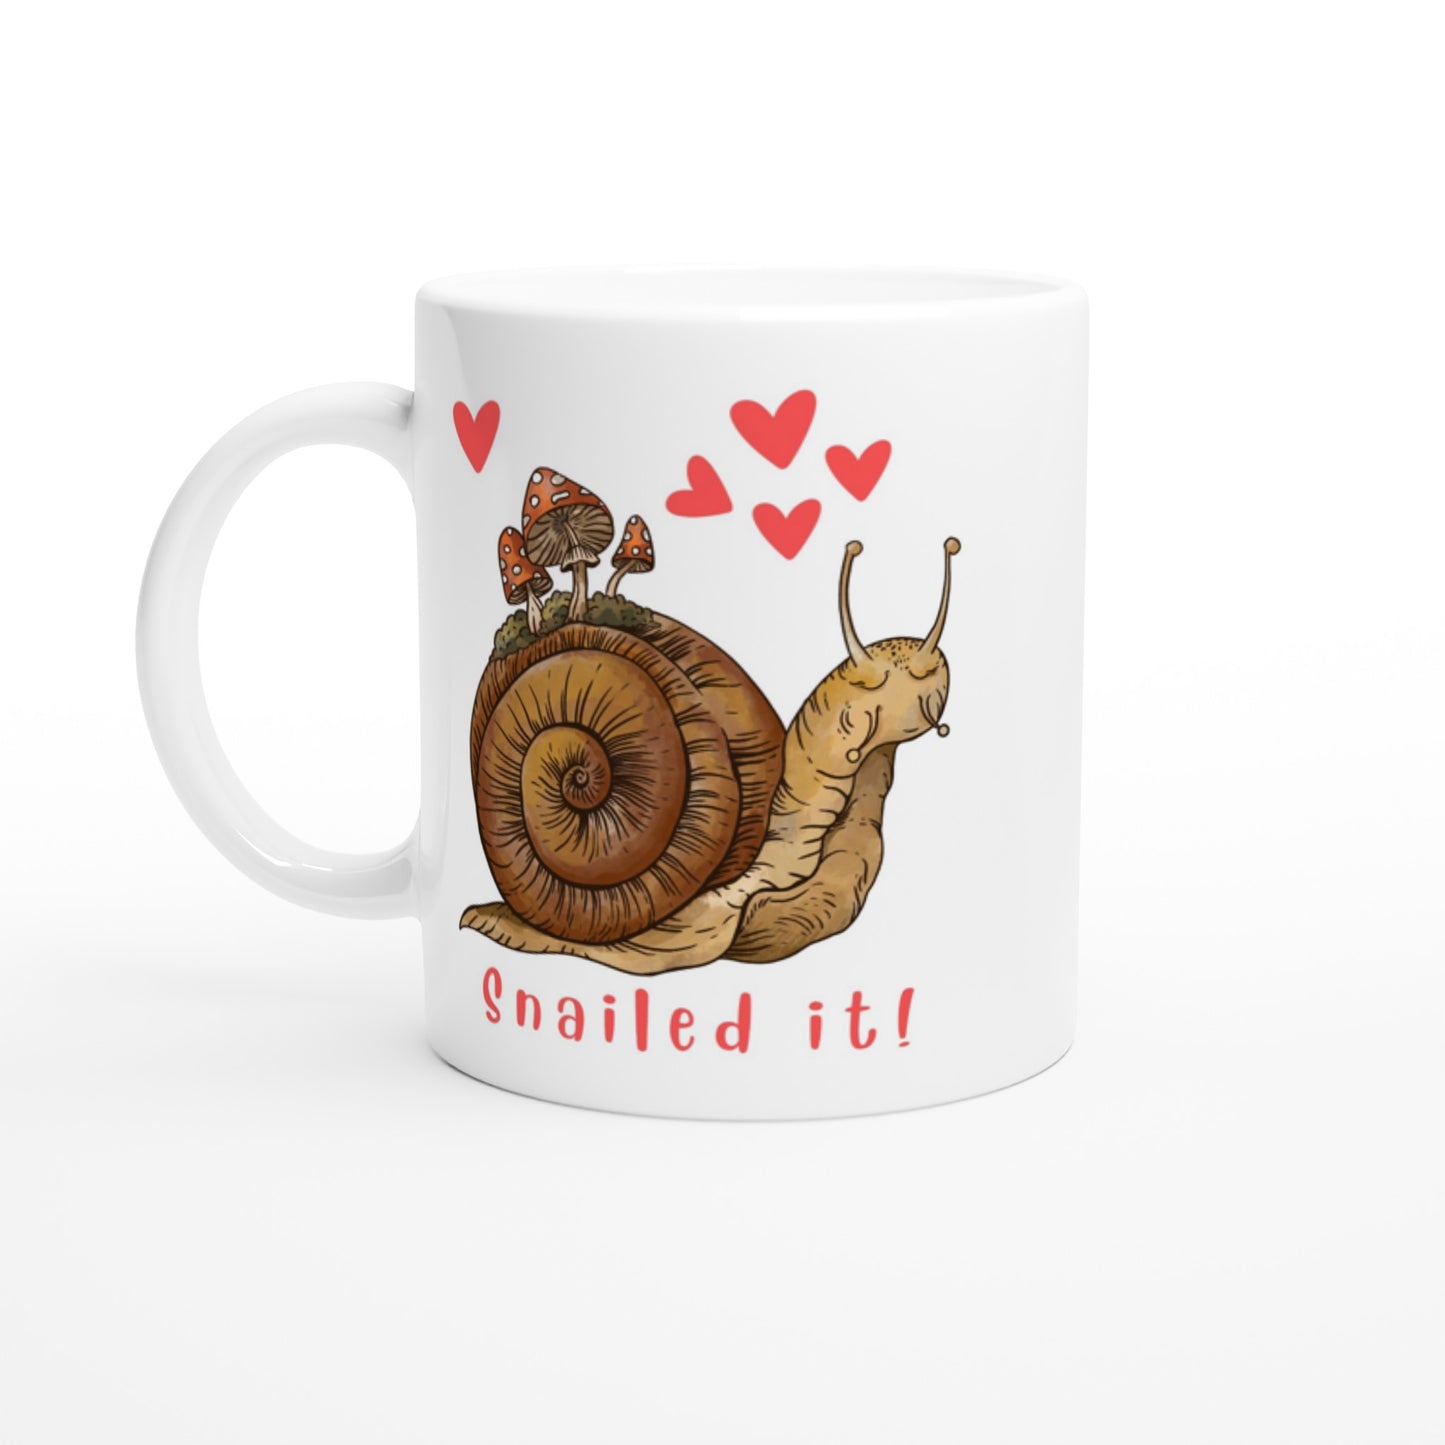 snailed it coffee cup.